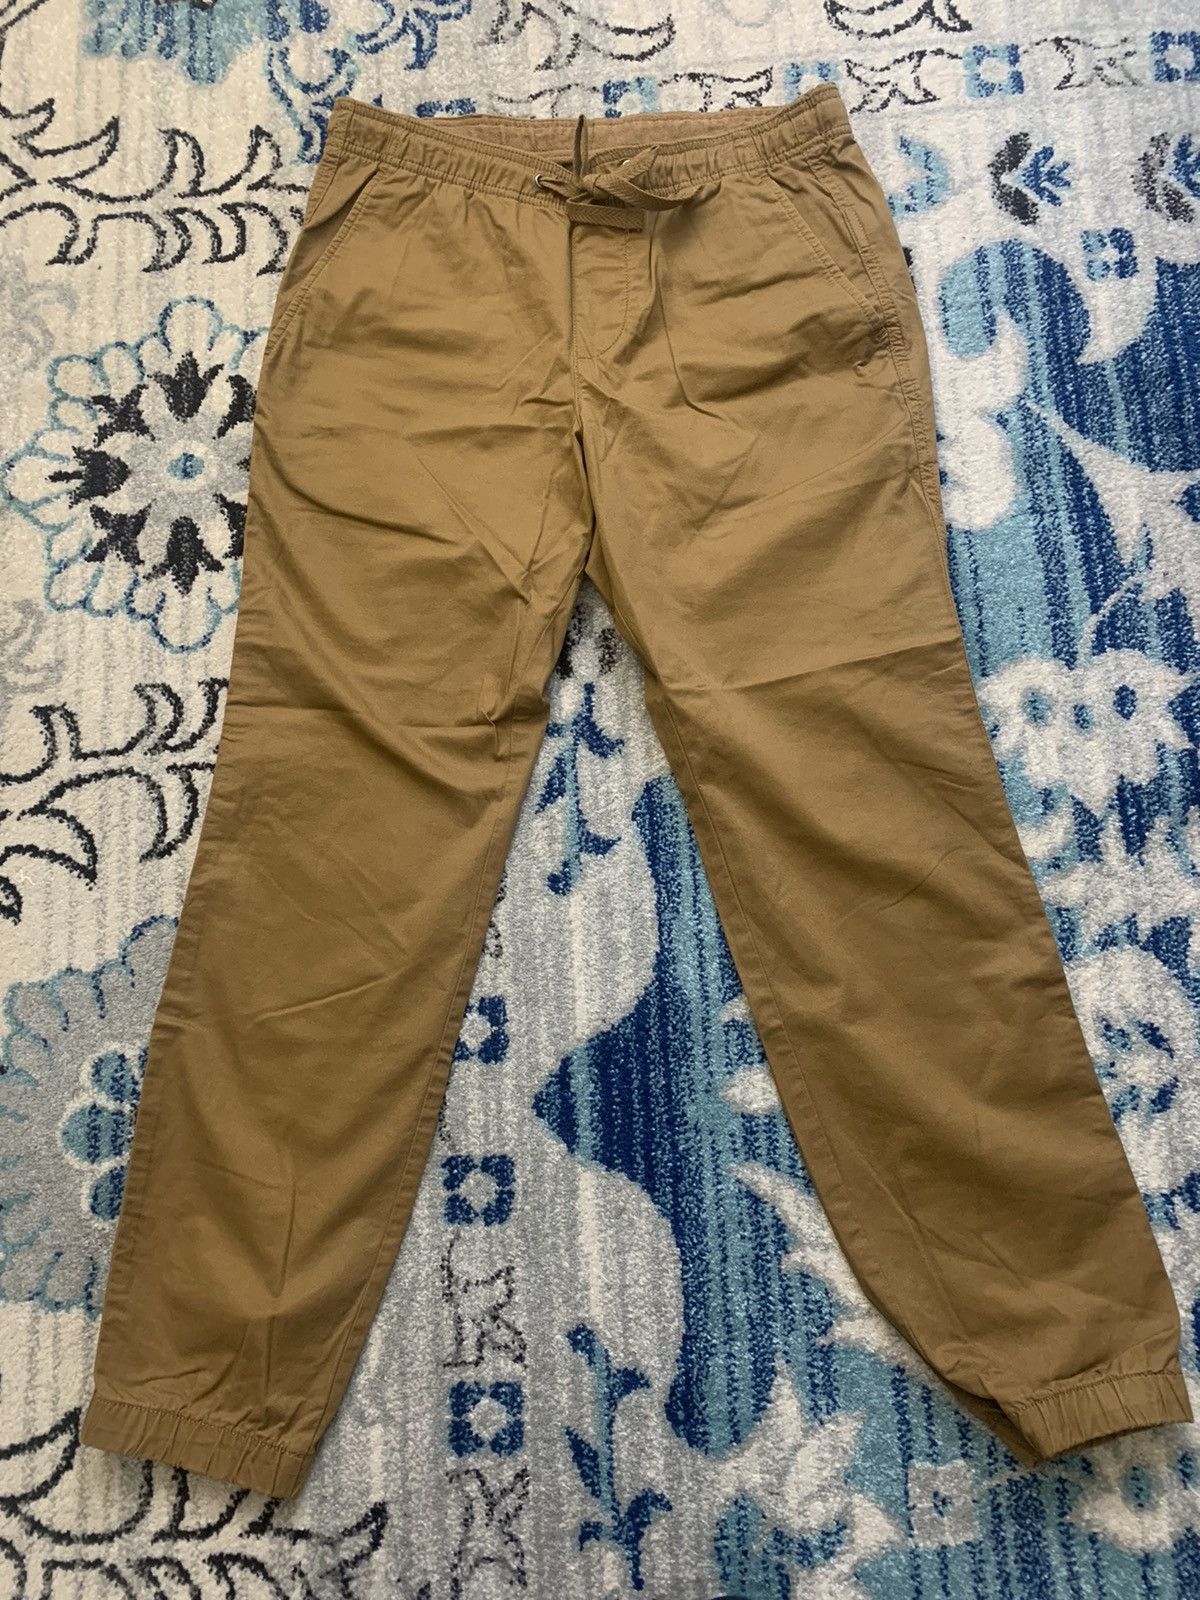 Gap Slim Canvas Joggers with Gapflex Size Small